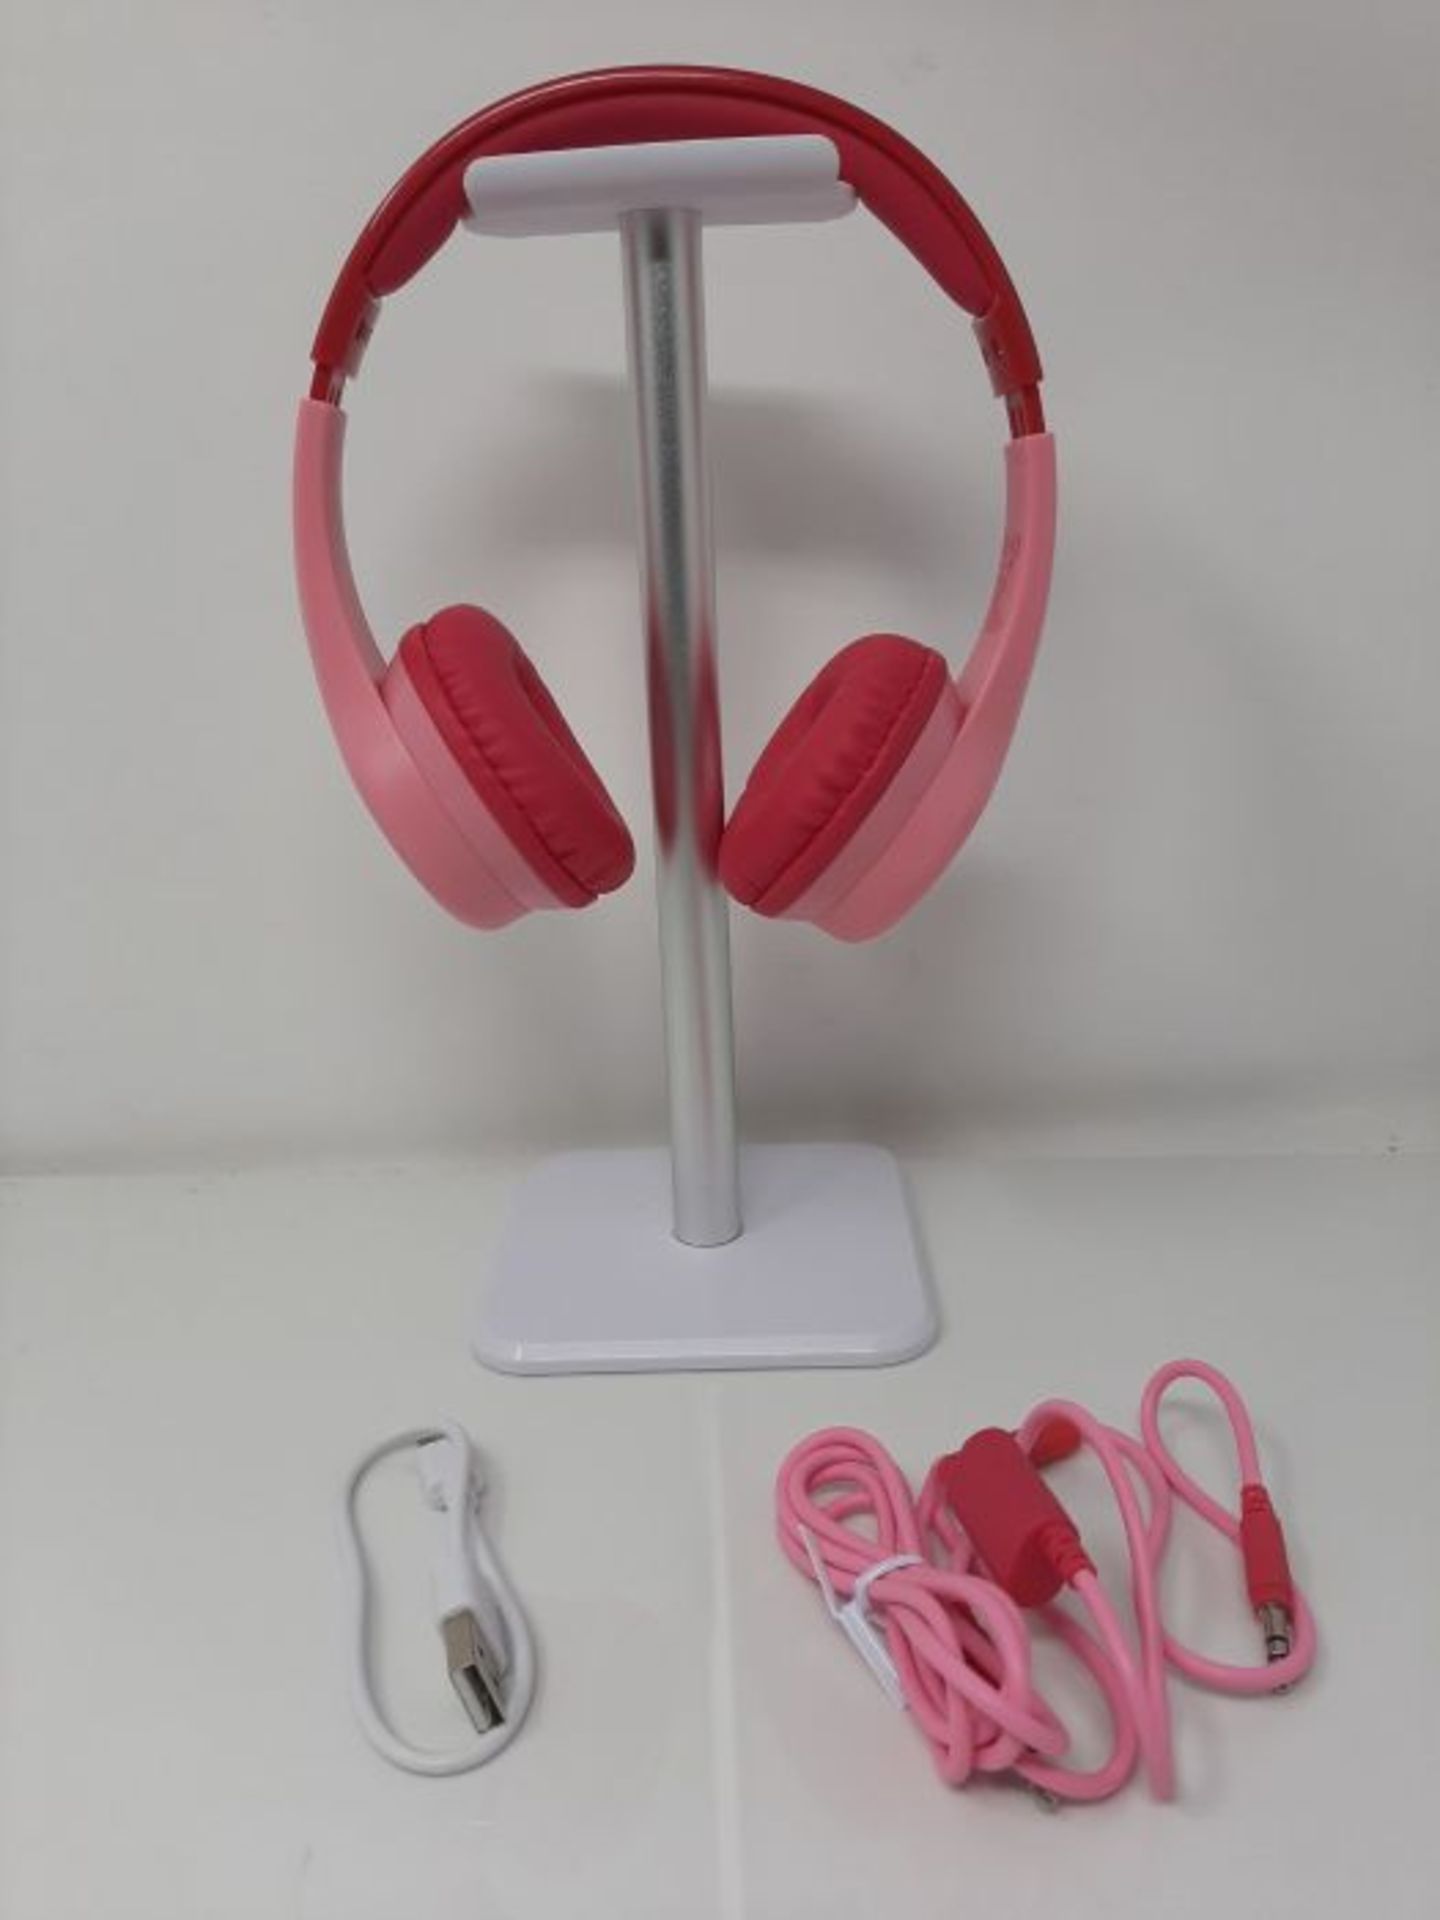 Motorola Squads 300 Wireless Kids Headphones with 15 Hours Play Time, Audio Splitter f - Image 3 of 3